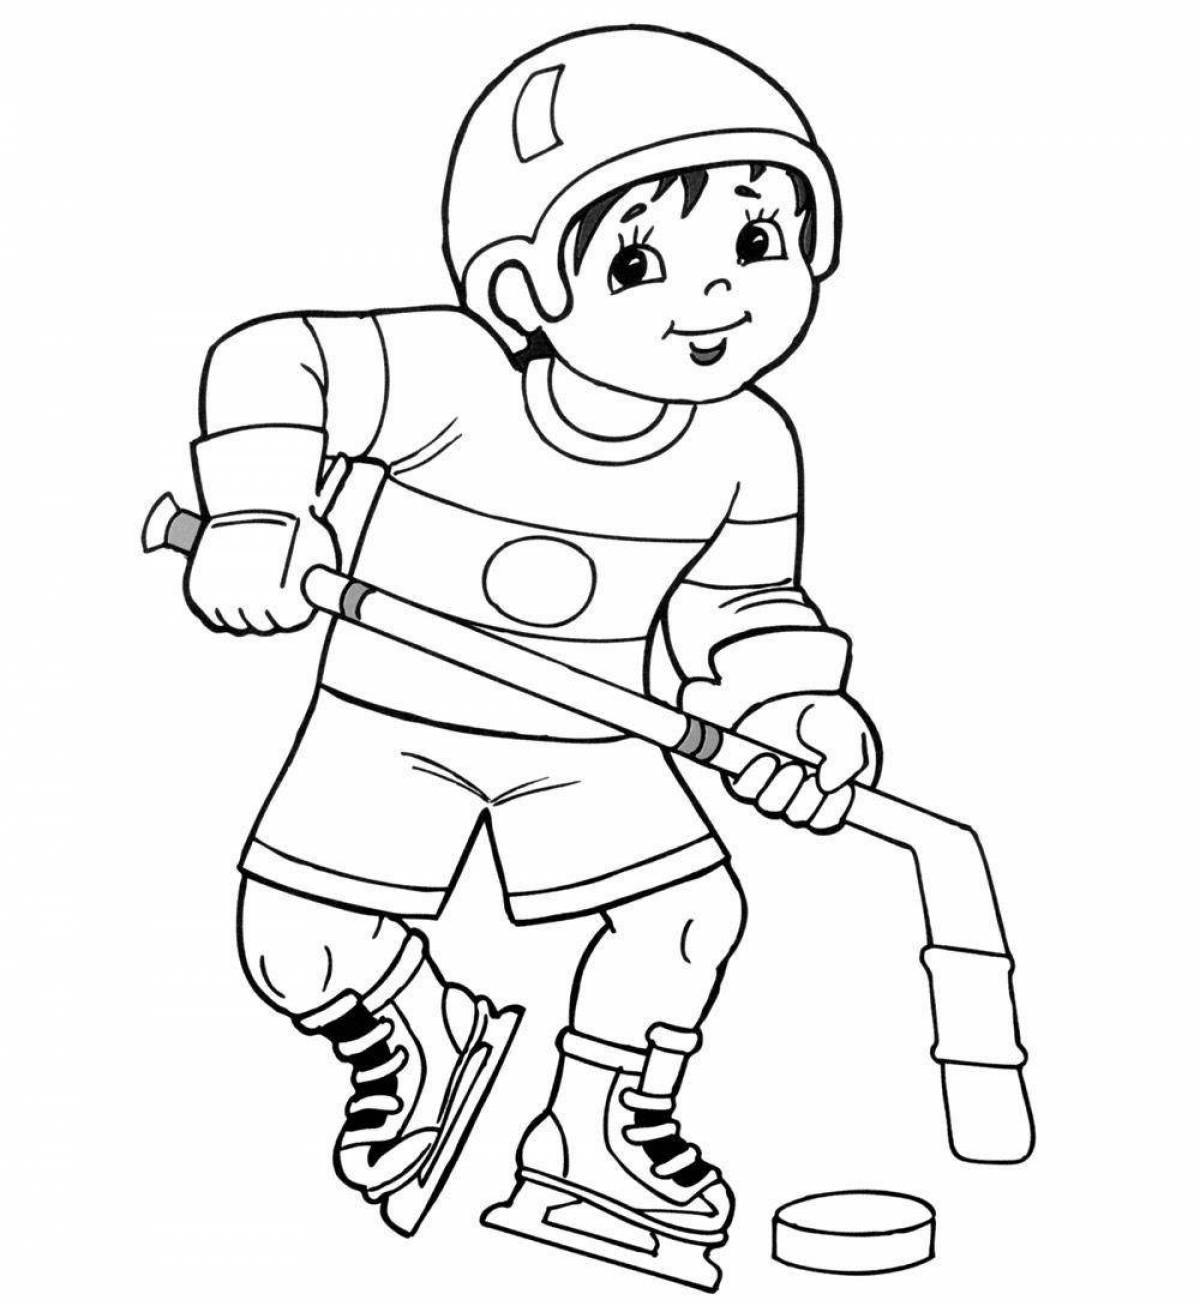 Rampant winter sports coloring book for kids